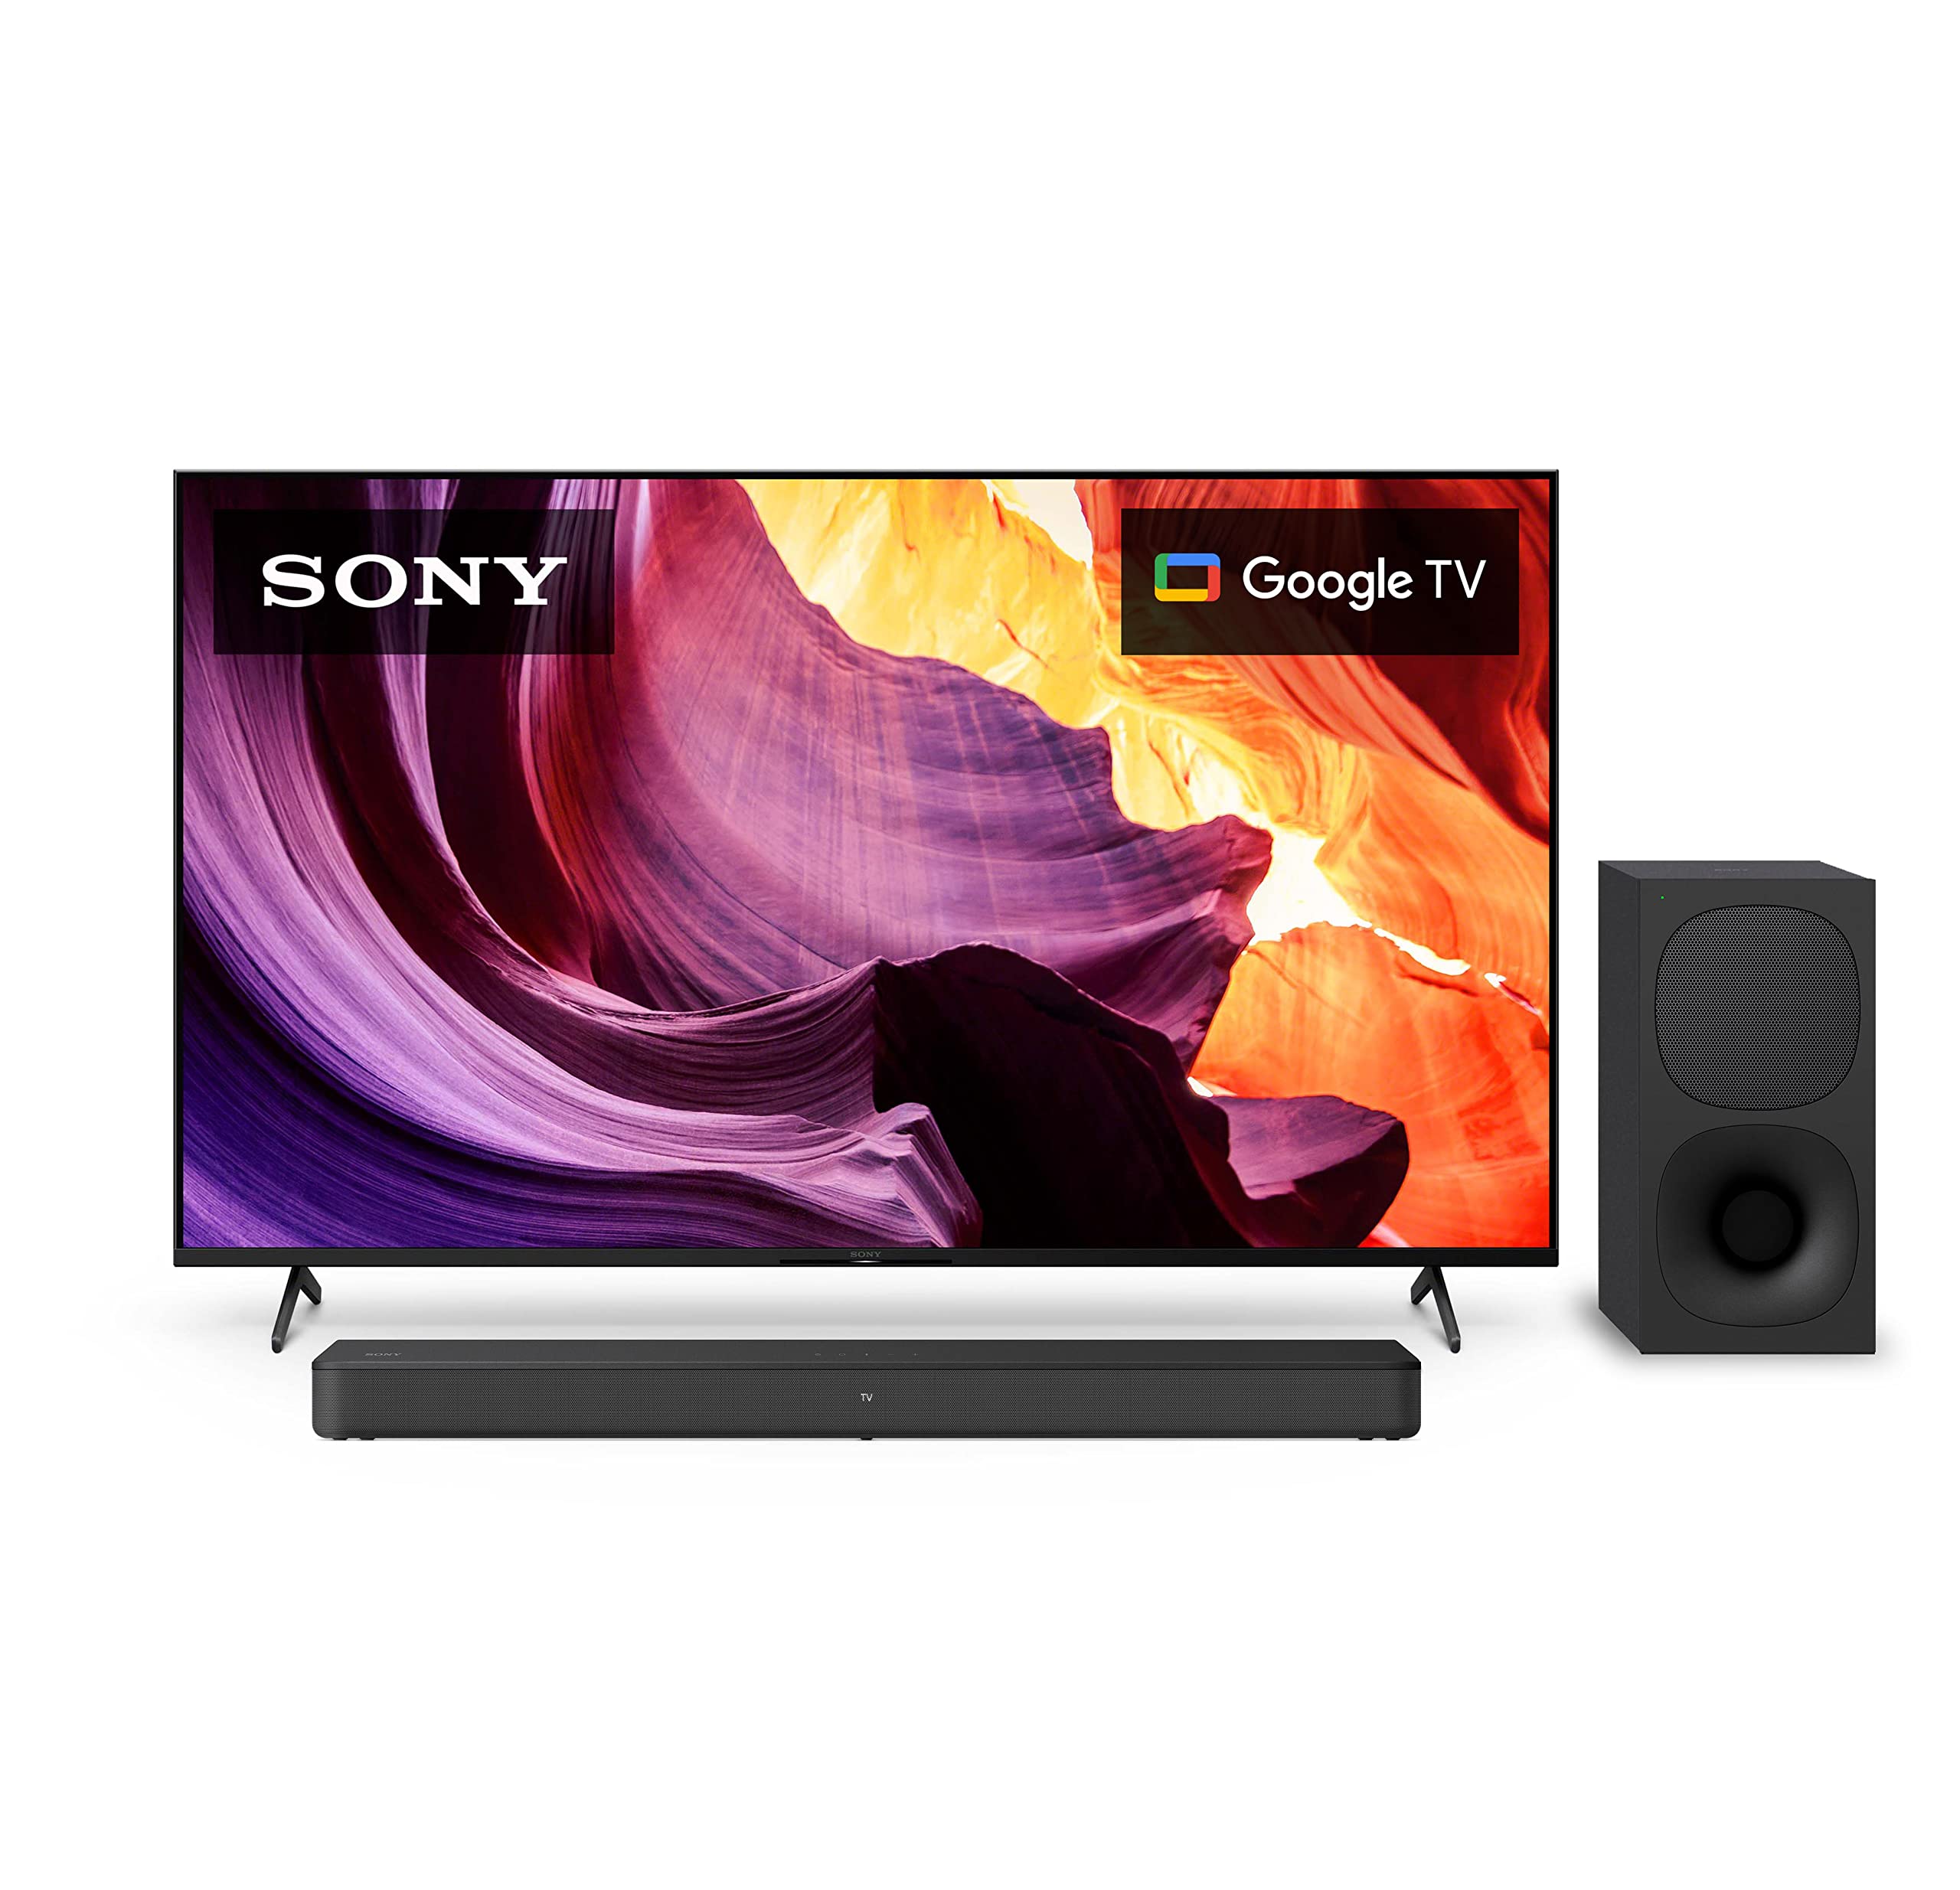 Sony 65 Inch 4K Ultra HD TV X80K Series: LED Smart Google TV KD65X80K- 2022 Model w/HT-S400 2.1ch Soundbar with Powerful Wireless subwoofer, S-Force PRO Front Surround Sound, and Dolby Digital